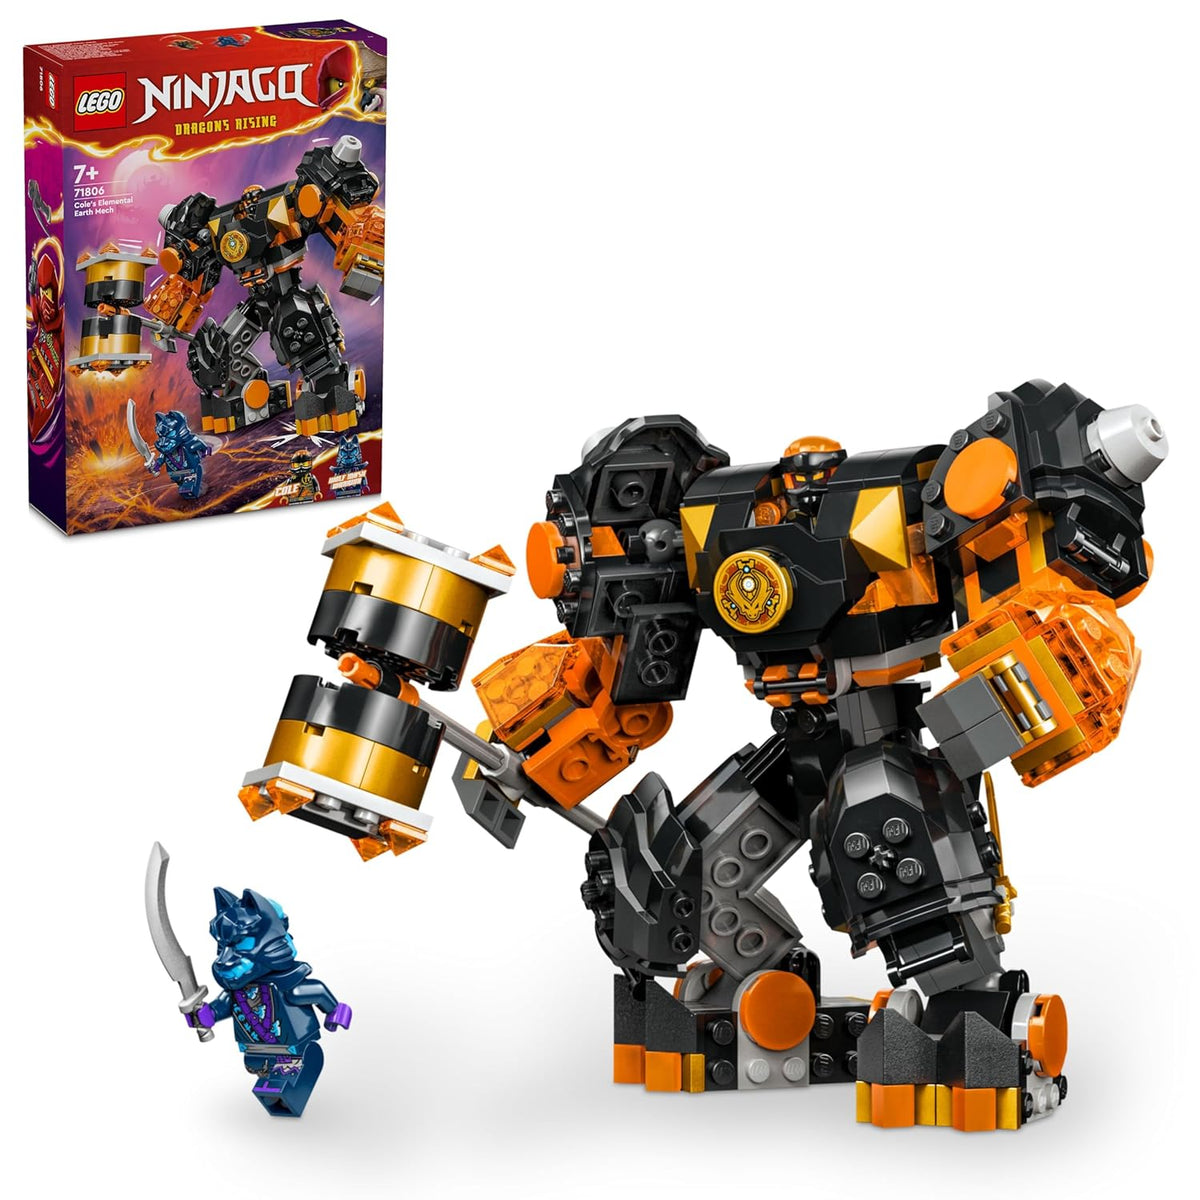 LEGO NINJAGO Cole’s Elemental Earth Mech Toy Set Building Kit for Ages 7+